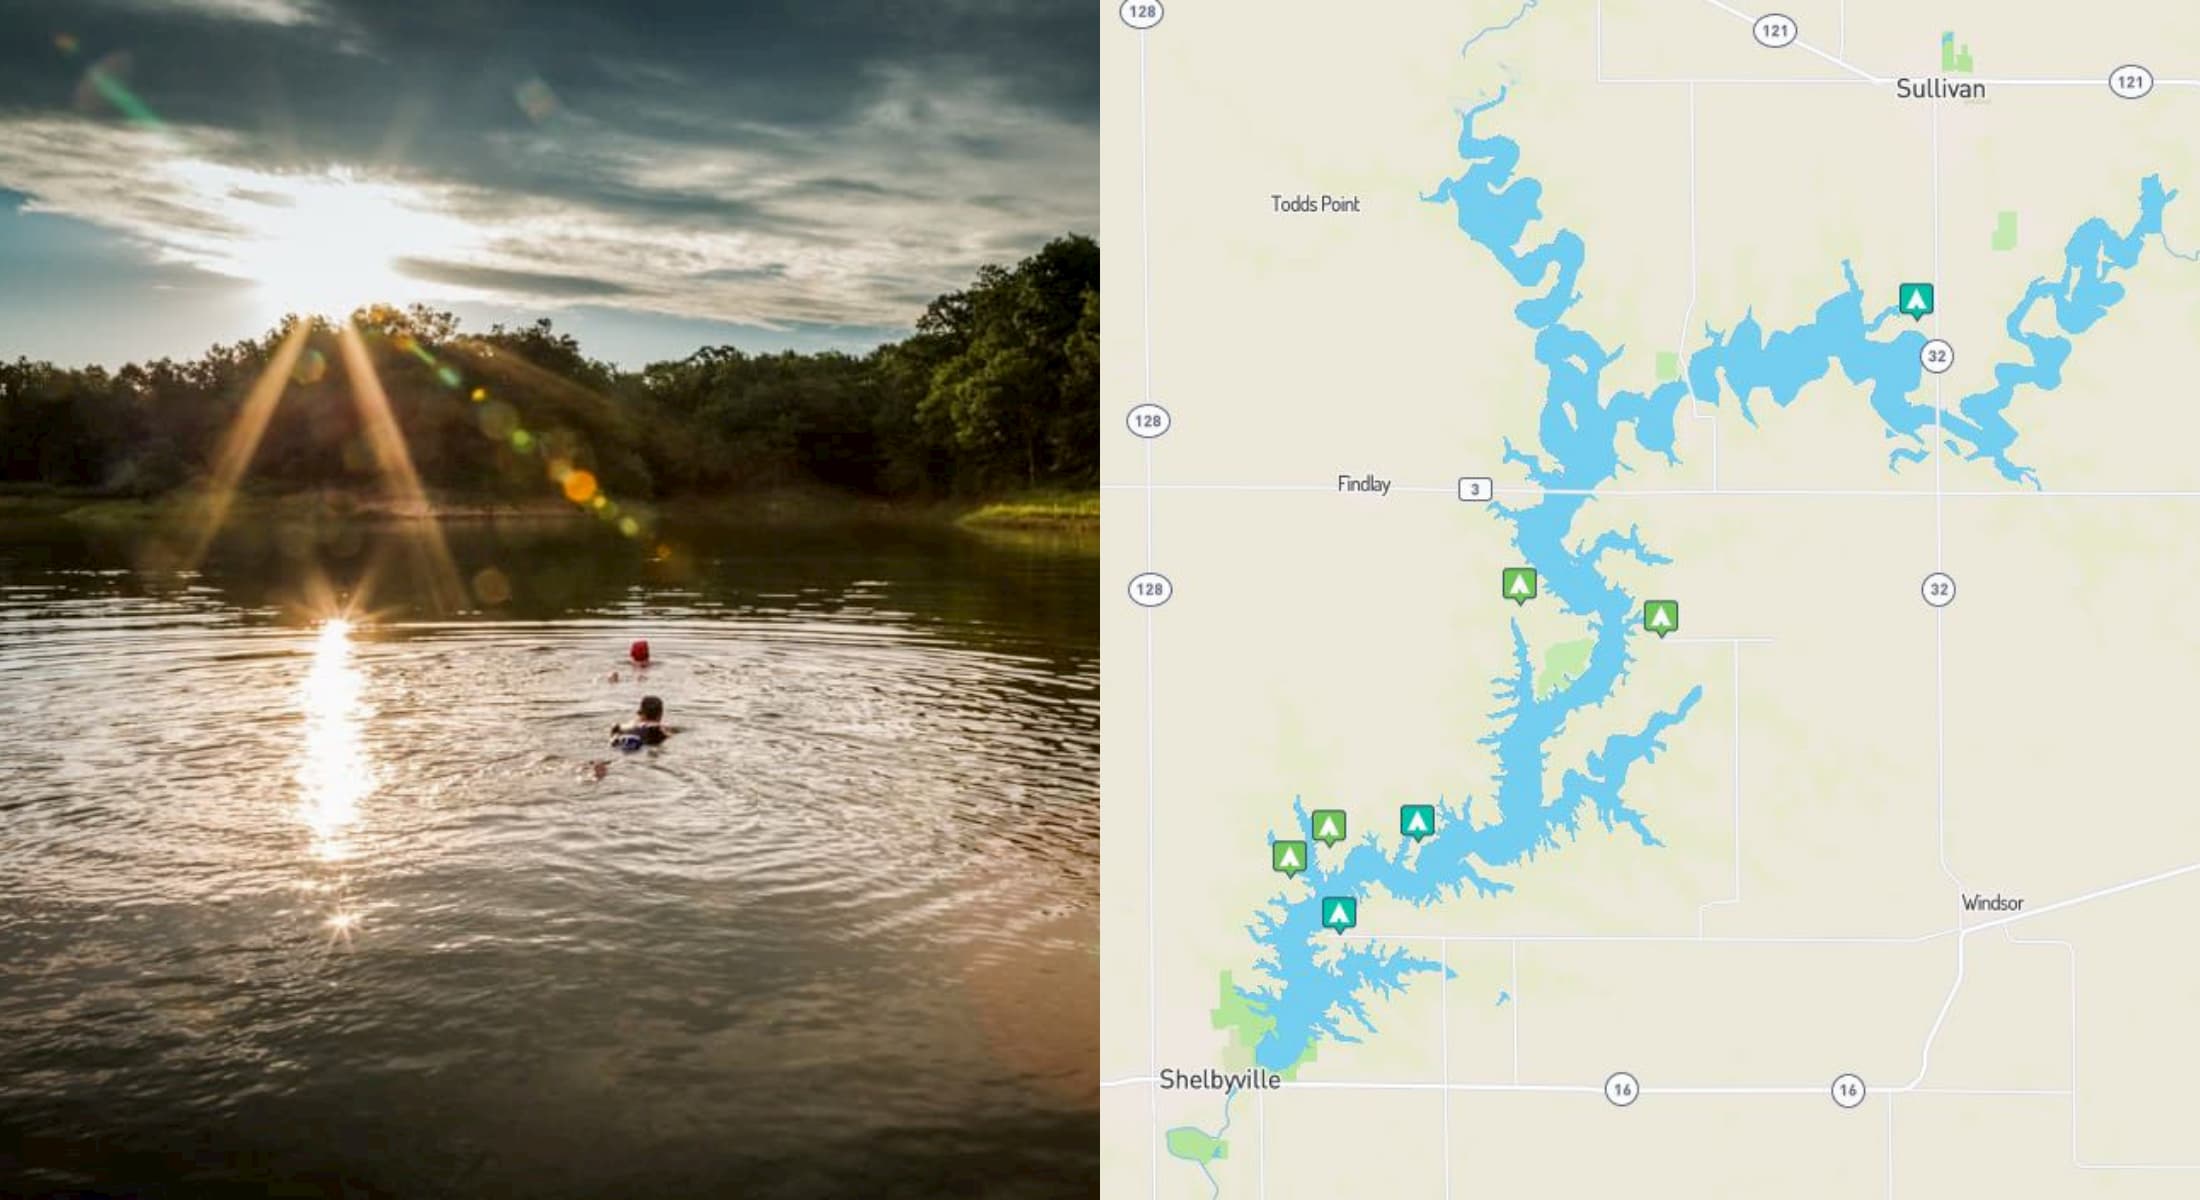 split image with sun rising over lake with 2 swimmers on left and on the right is a map of campgrounds on lake shelbyville